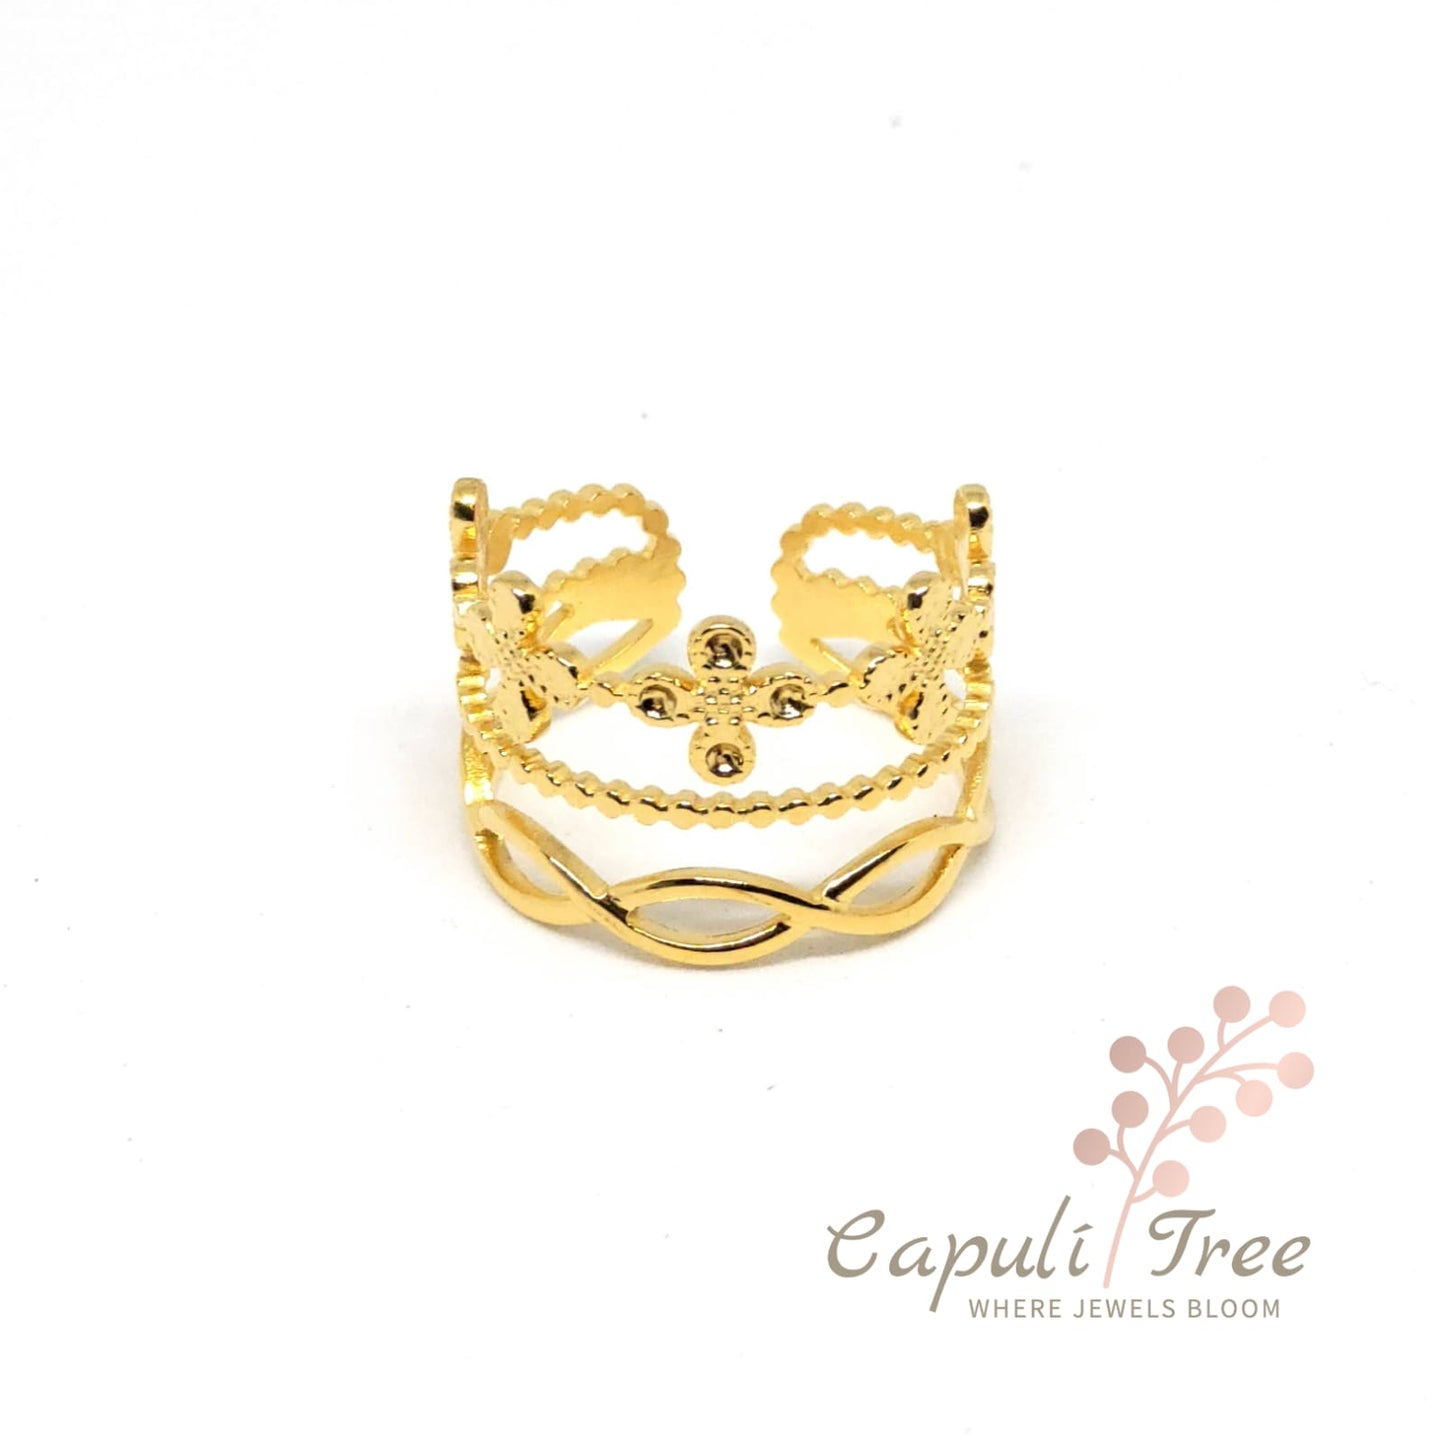 STAINLESS STEEL "CROWN" RING